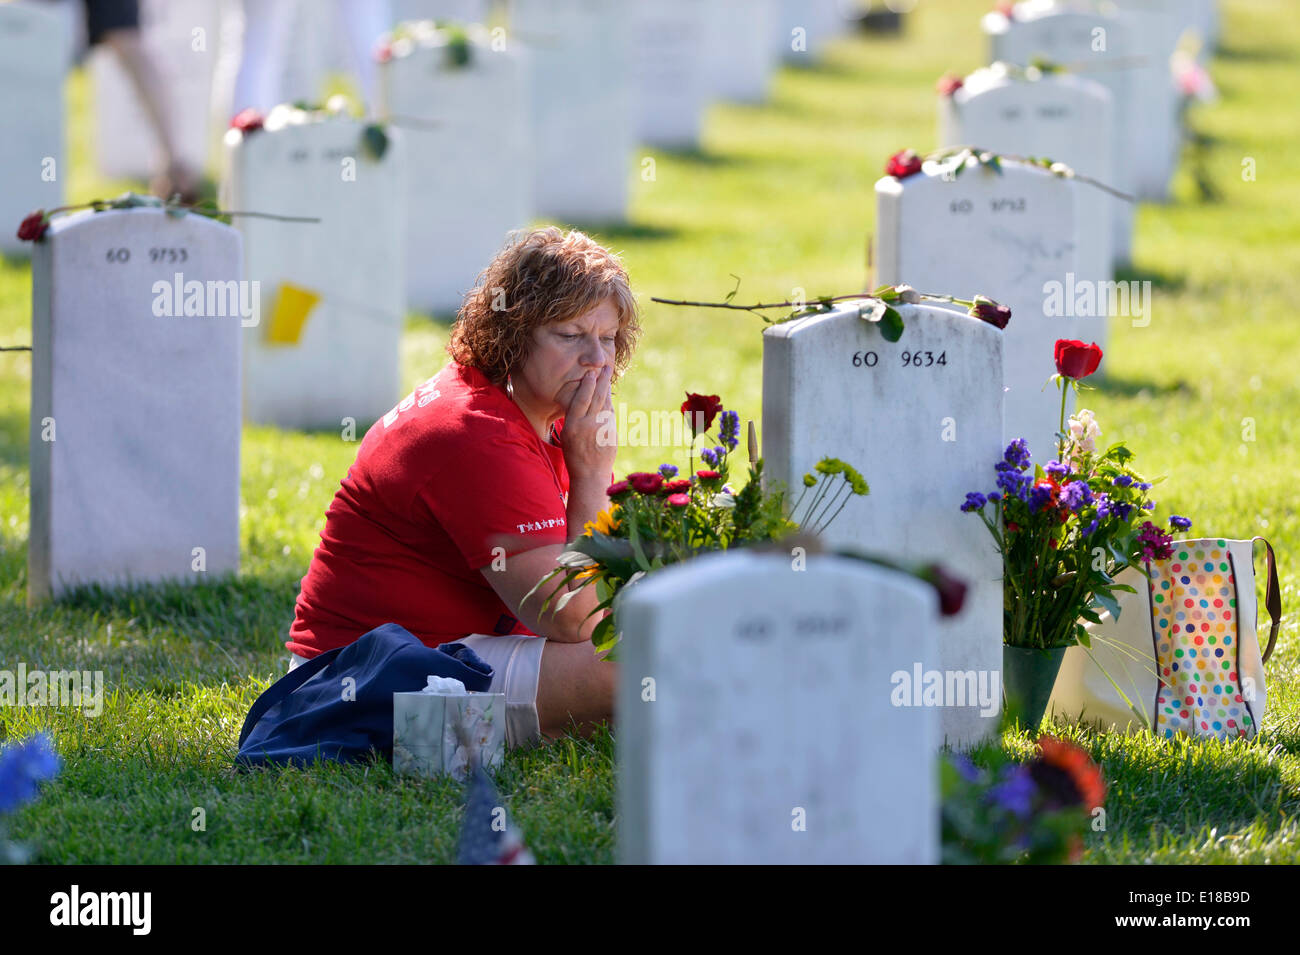 Washington, DC, USA. 26th May, 2014. Kathy Sayne mourns for her son who was killed in Afghanistan in 2011 at the section 60 of Arlington National Cemetery, outside Washington, DC, the United States, May 26, 2014. People crowded in Arlington National Cemetery, especially in Section 60, where America's most recent war deads lie, during the memorial day. Credit:  Yin Bogu/Xinhua/Alamy Live News Stock Photo